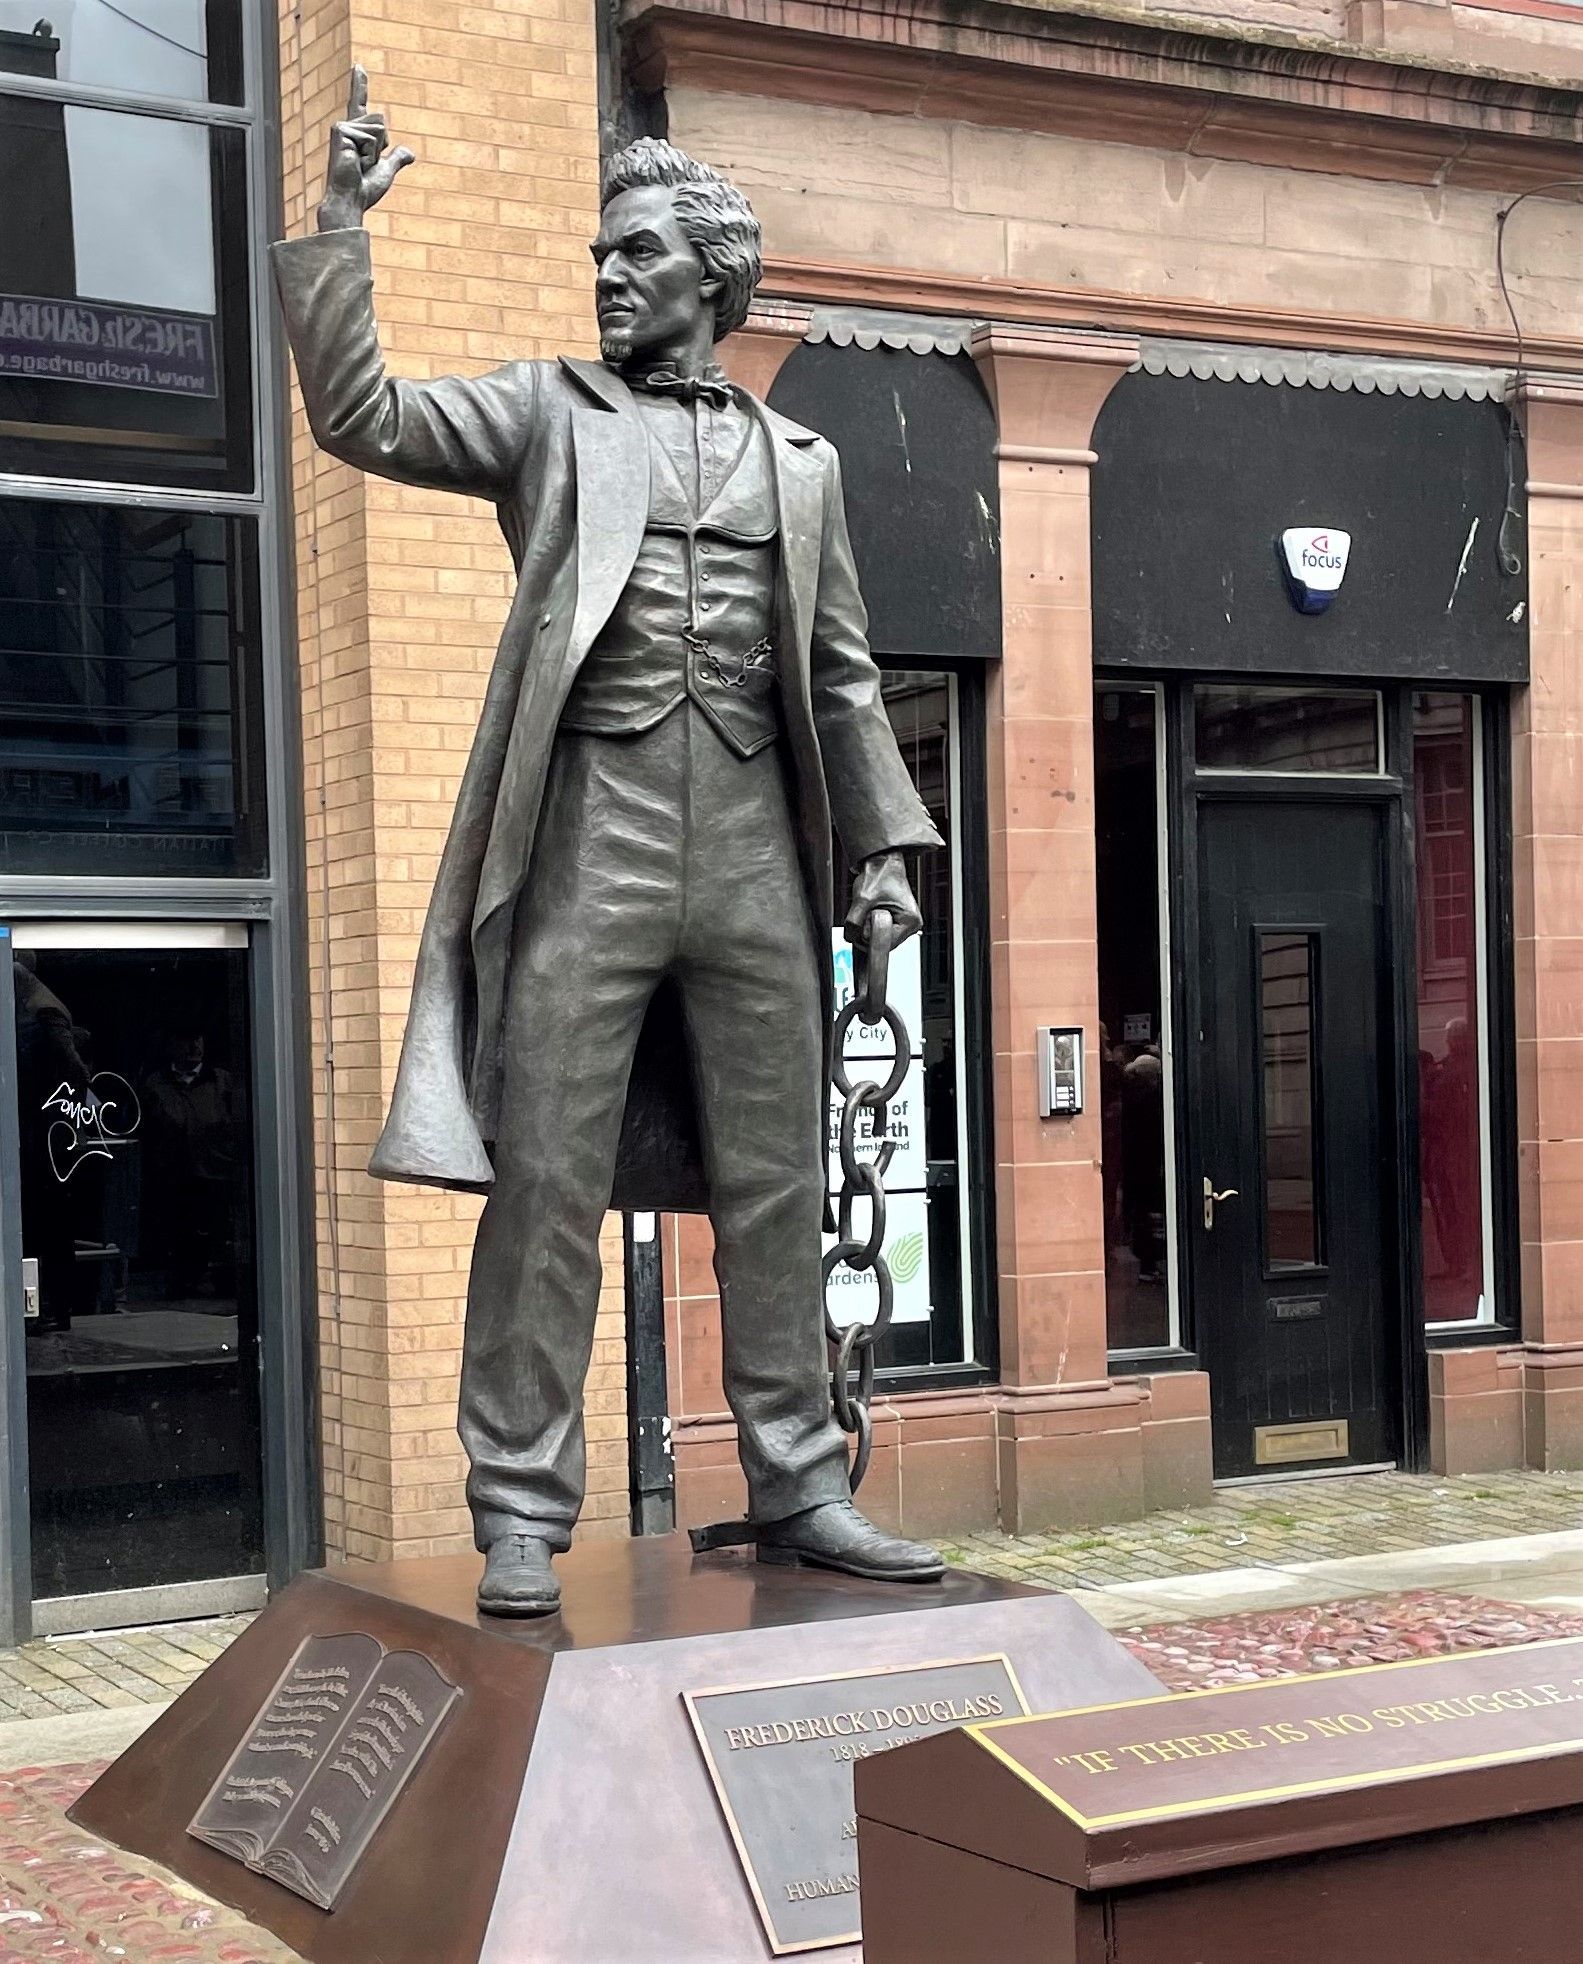 HISTORICAL FIGURE: The Frederick Douglass statue that was erected in Belfast last year